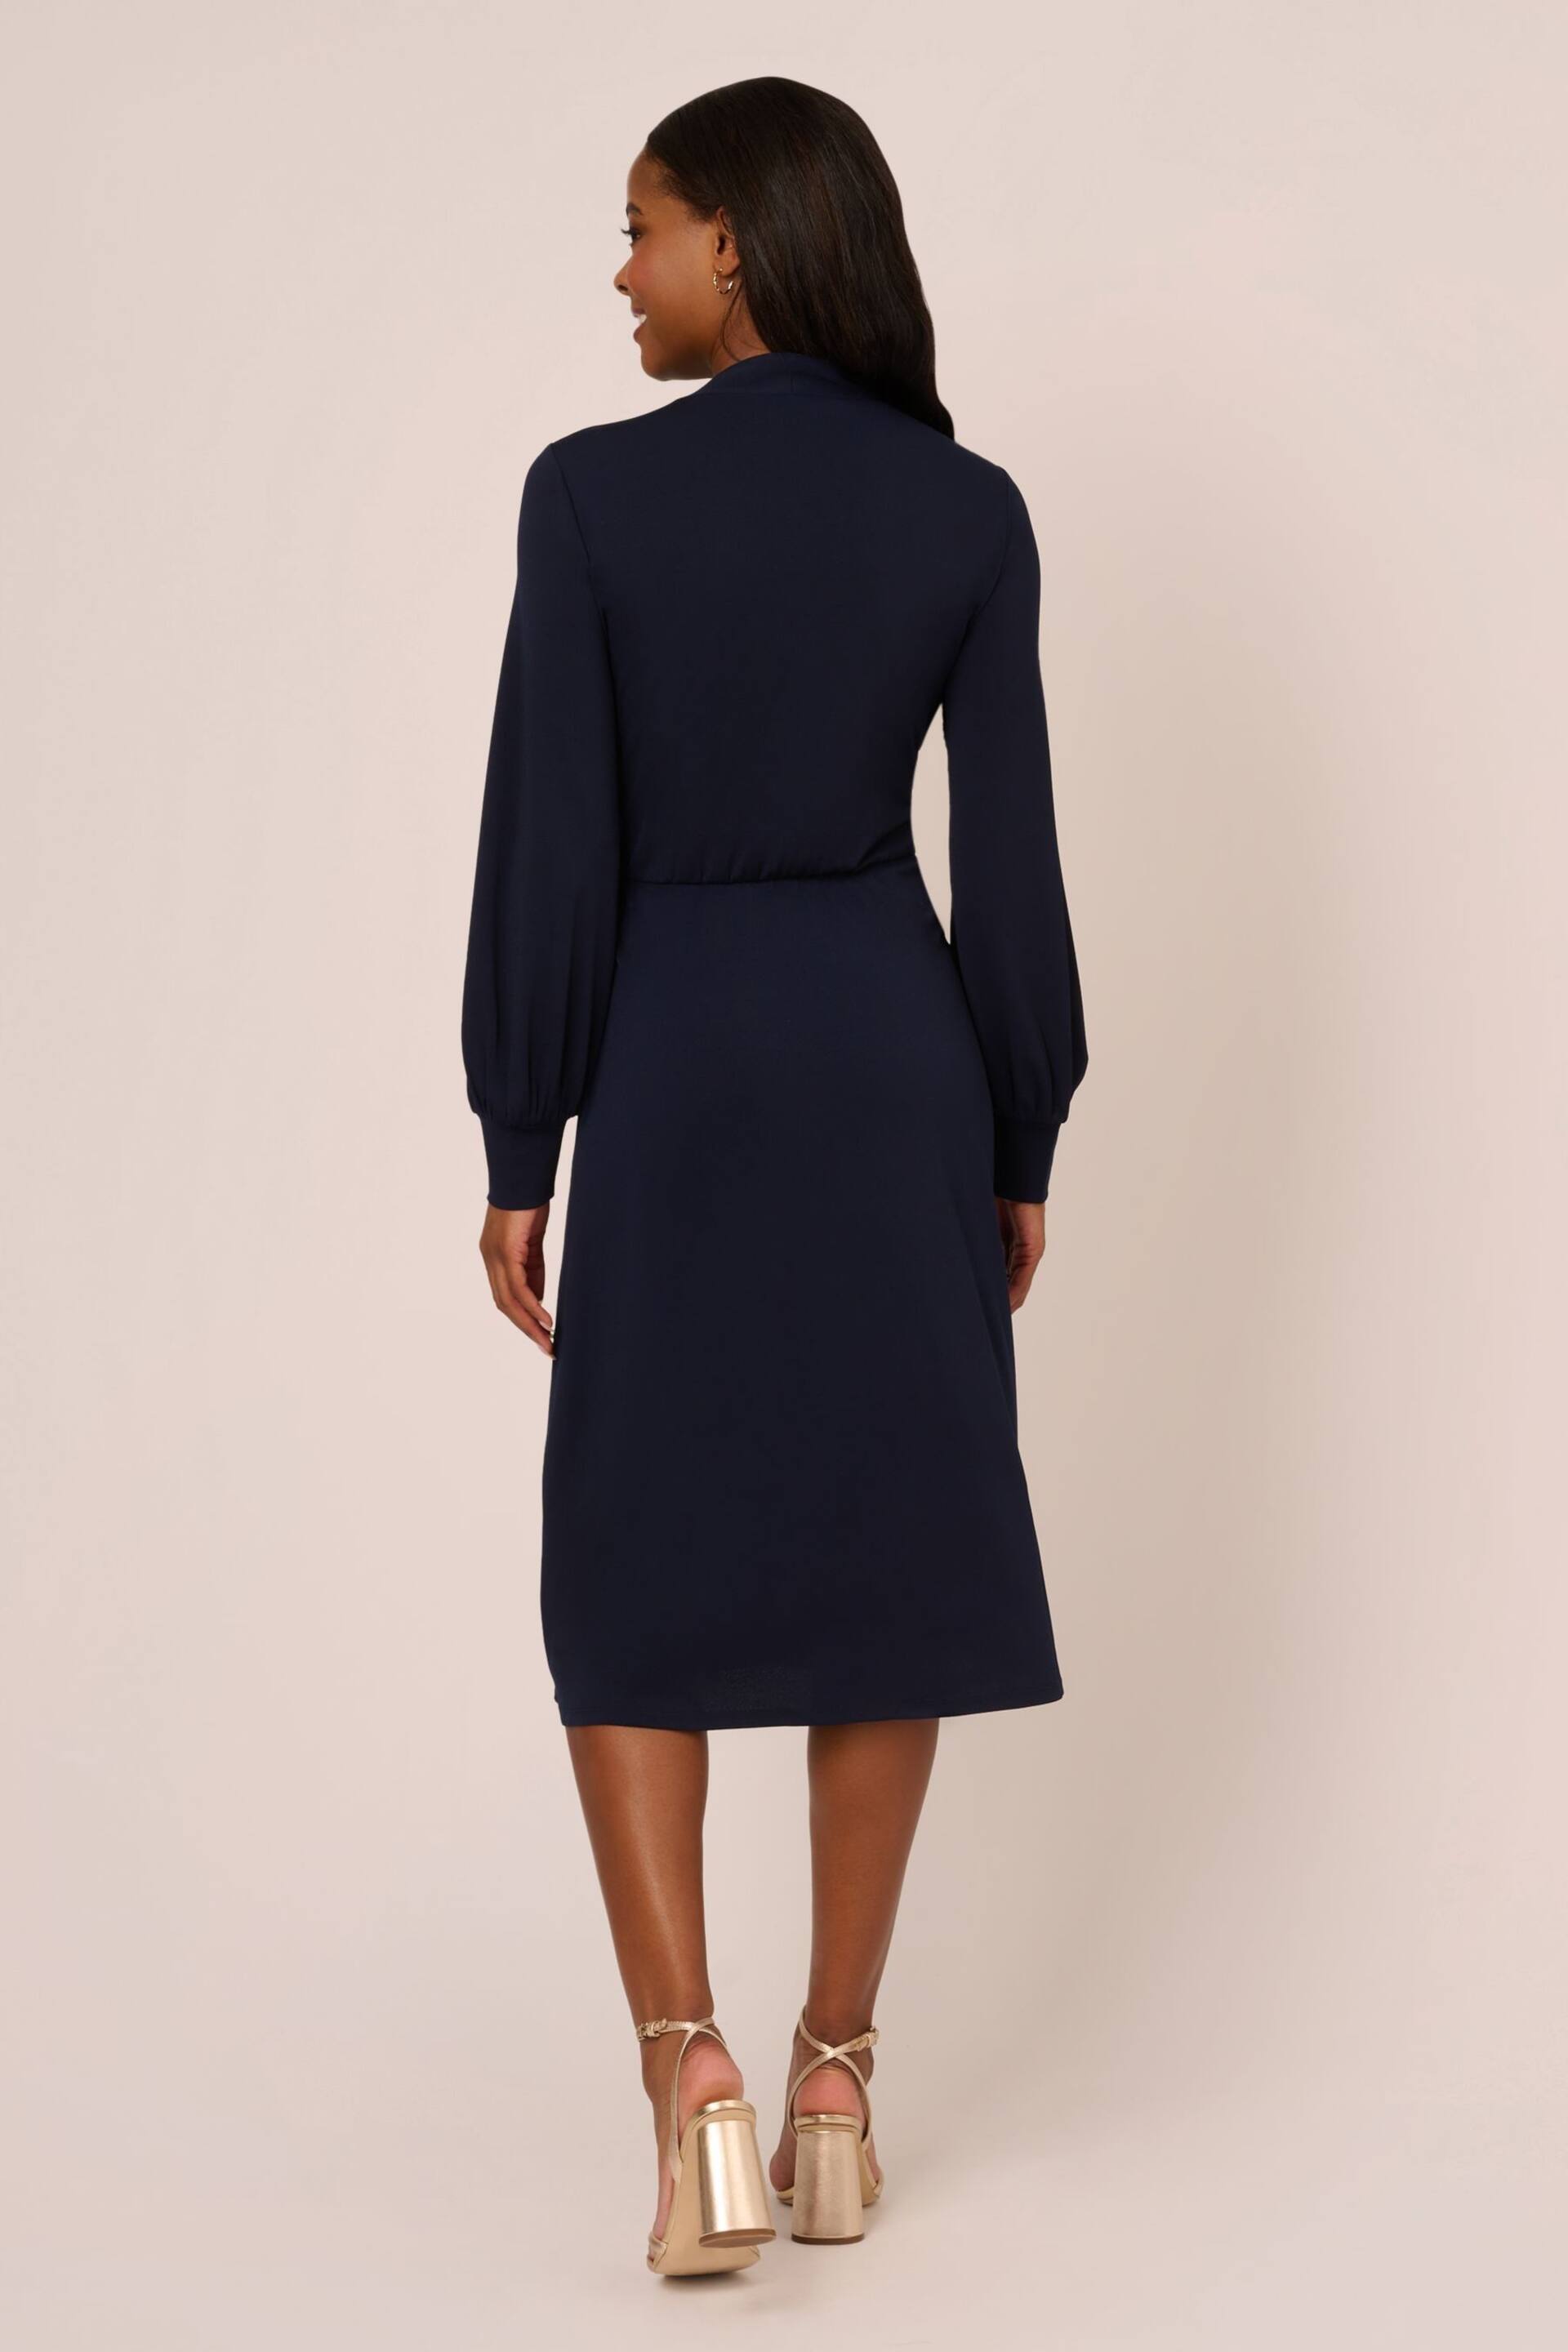 Adrianna Papell Blue Long Sleeve Wrap Dress - Image 2 of 7